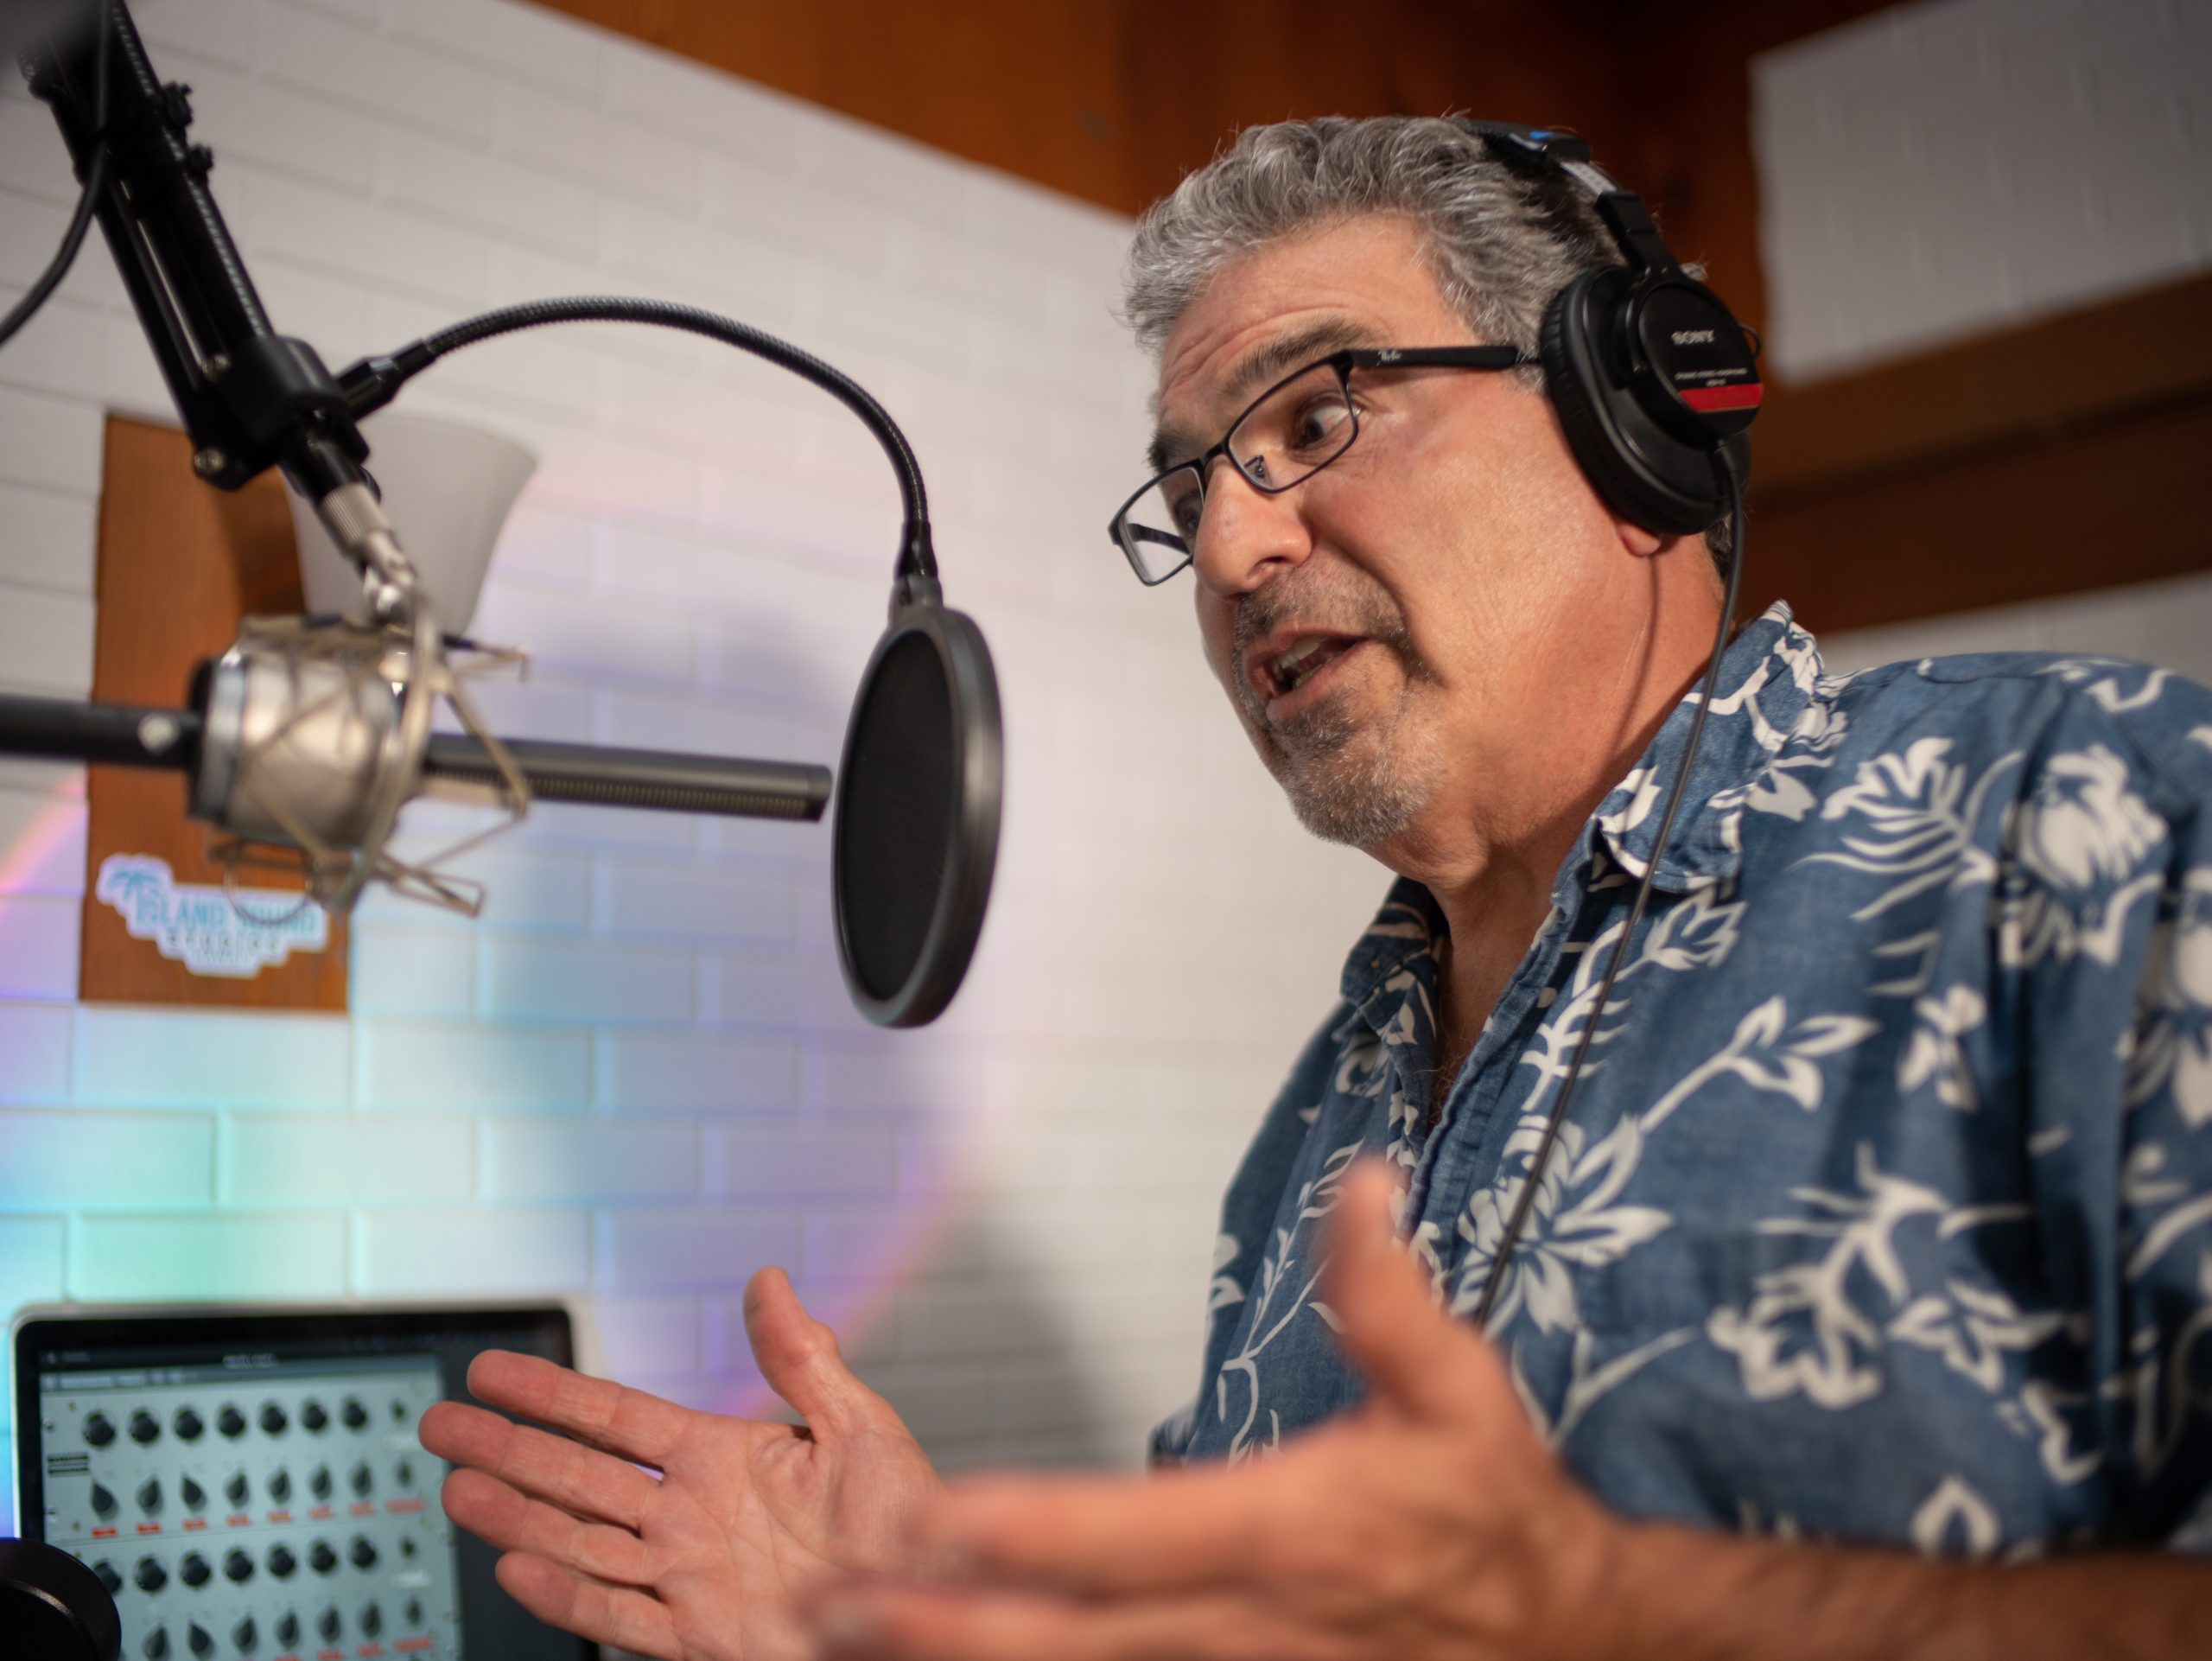 Losing his voice? Voice-over master Dean Compoginis sounds an alarm about AI